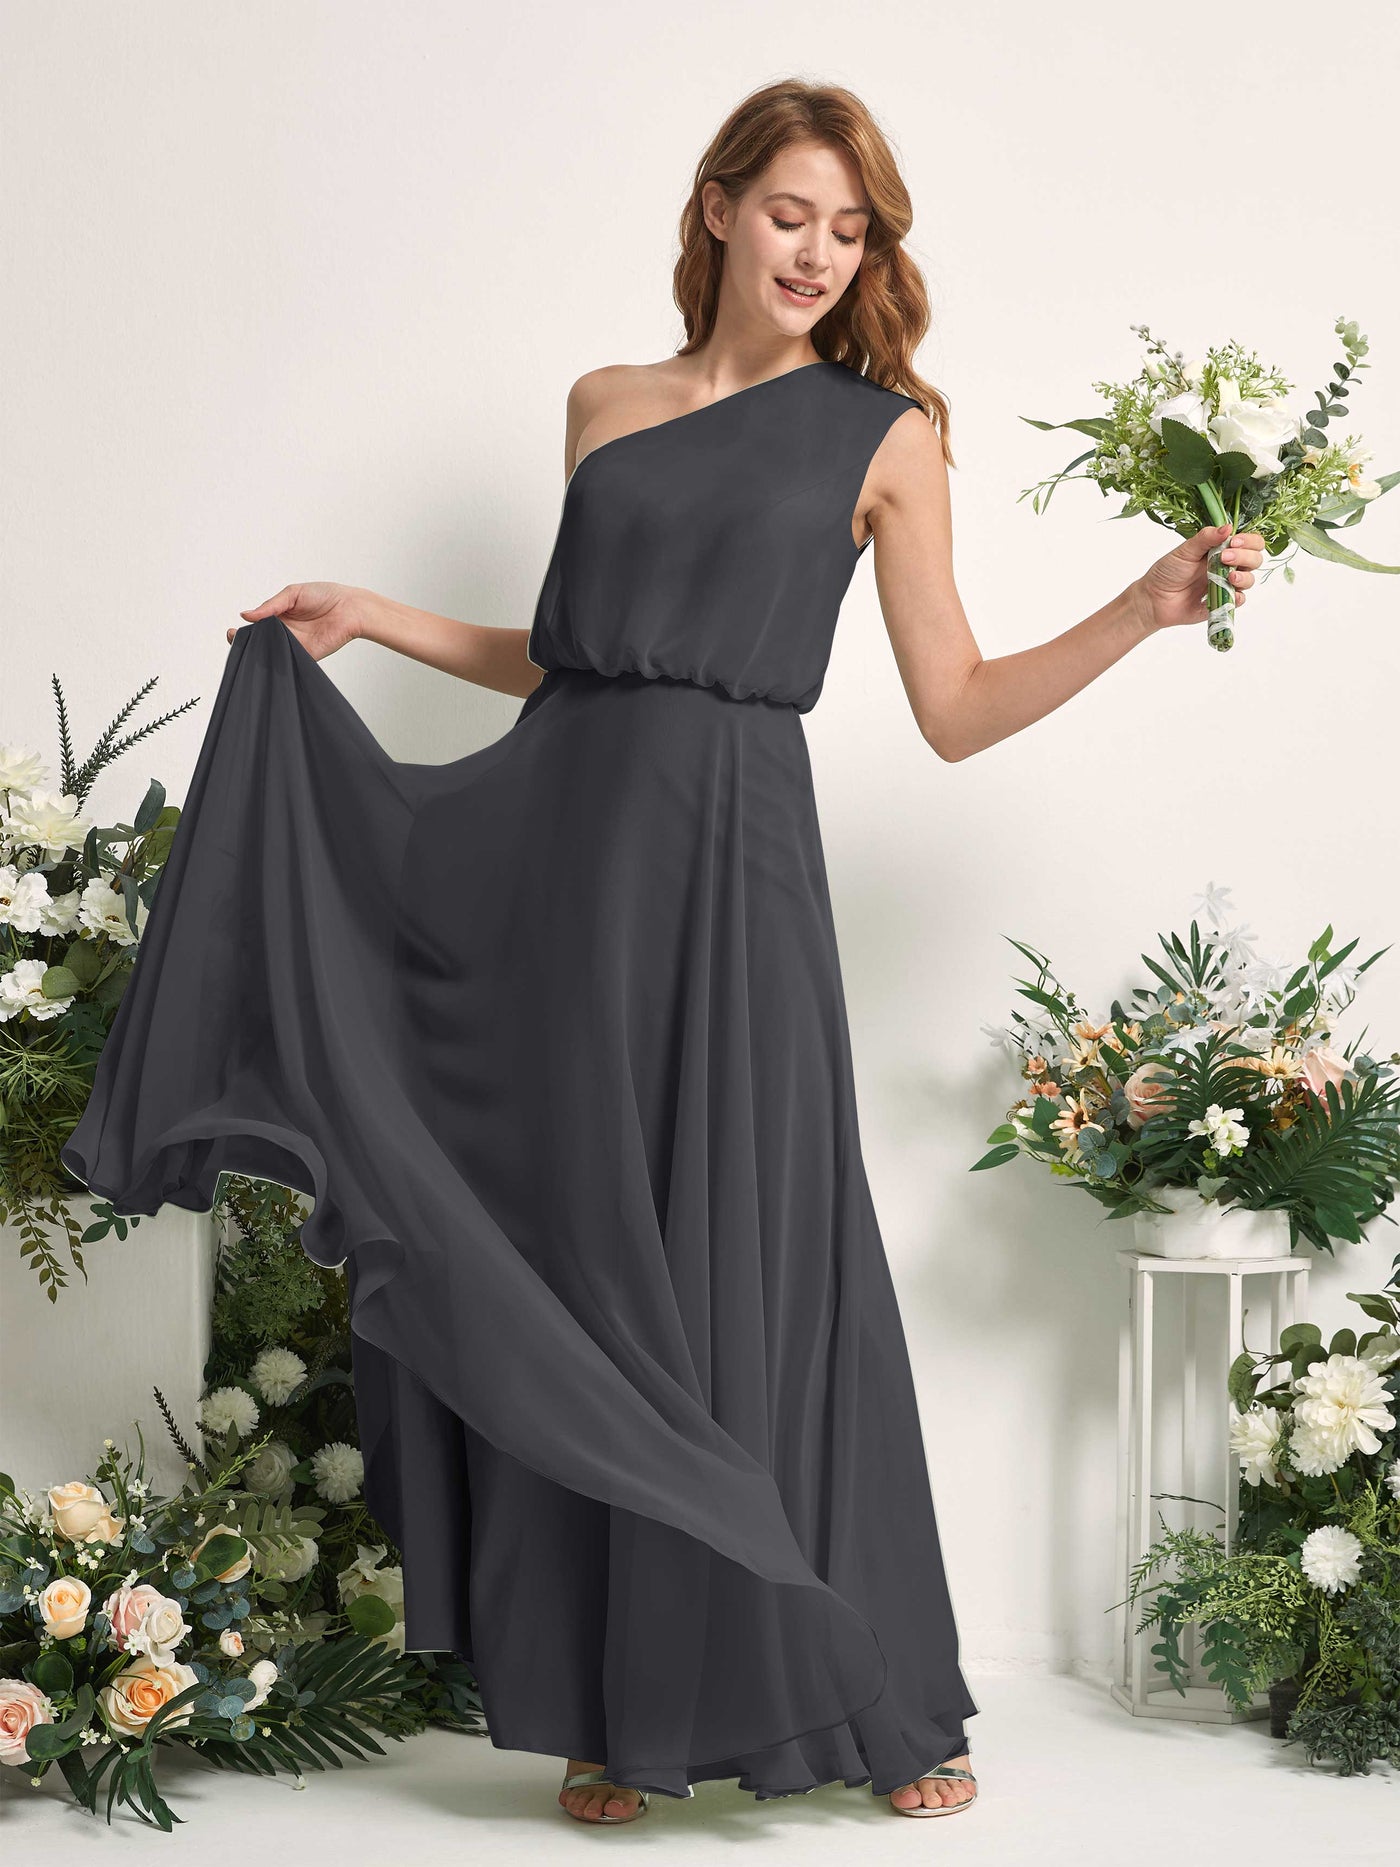 Bridesmaid Dress A-line Chiffon One Shoulder Full Length Sleeveless Wedding Party Dress - Pewter (81226838)#color_pewter